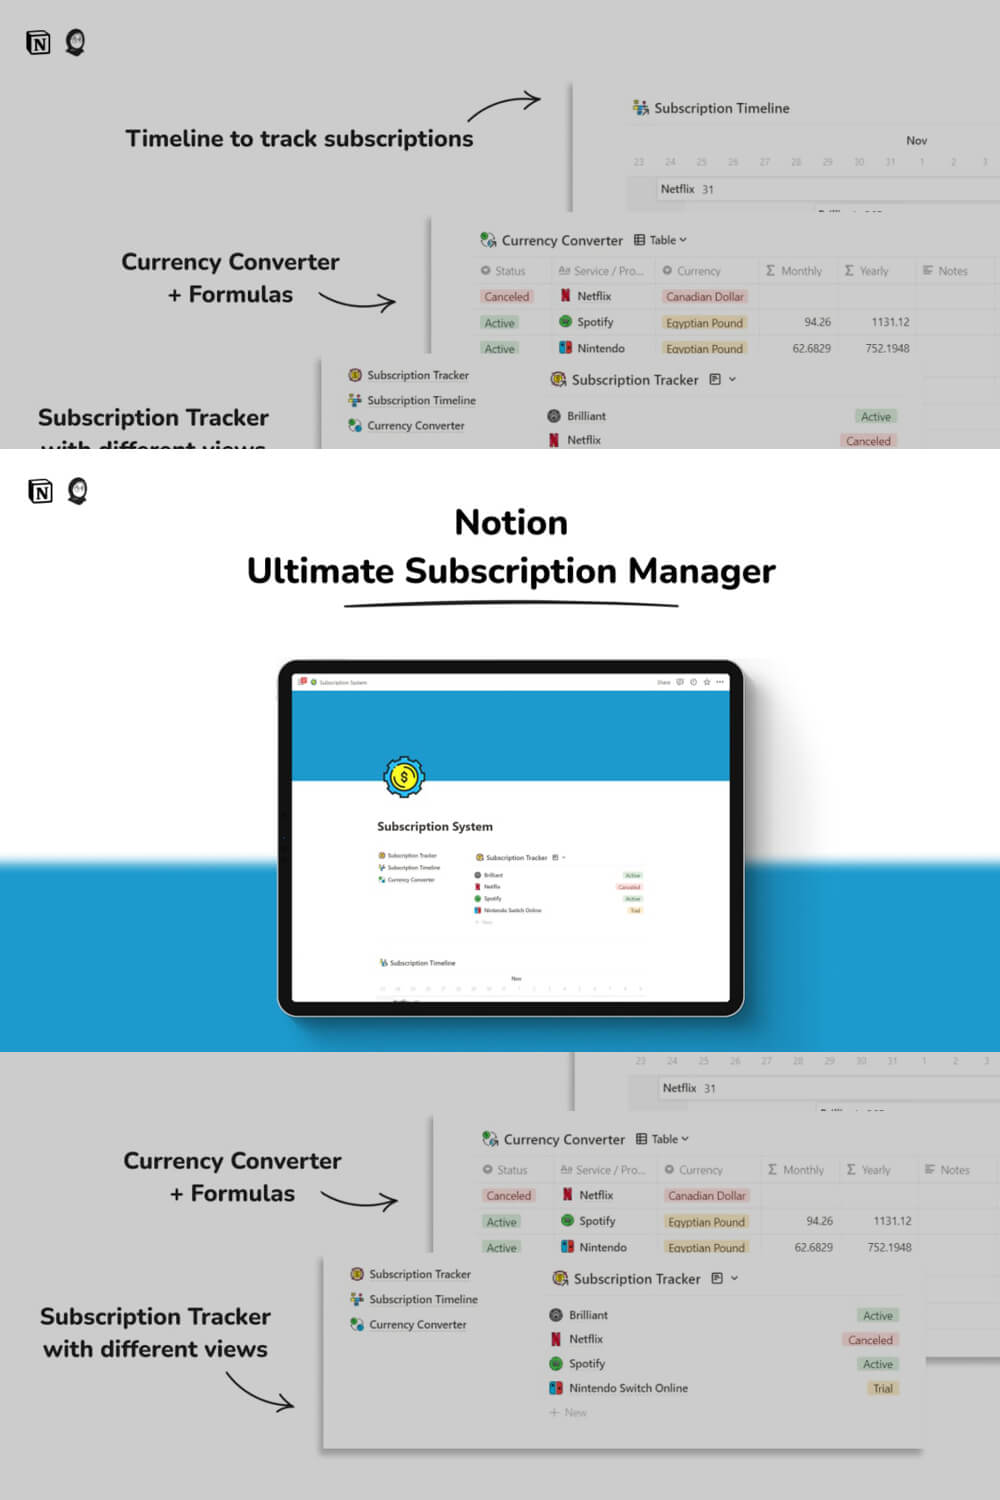 Timeline to track subscriptions.